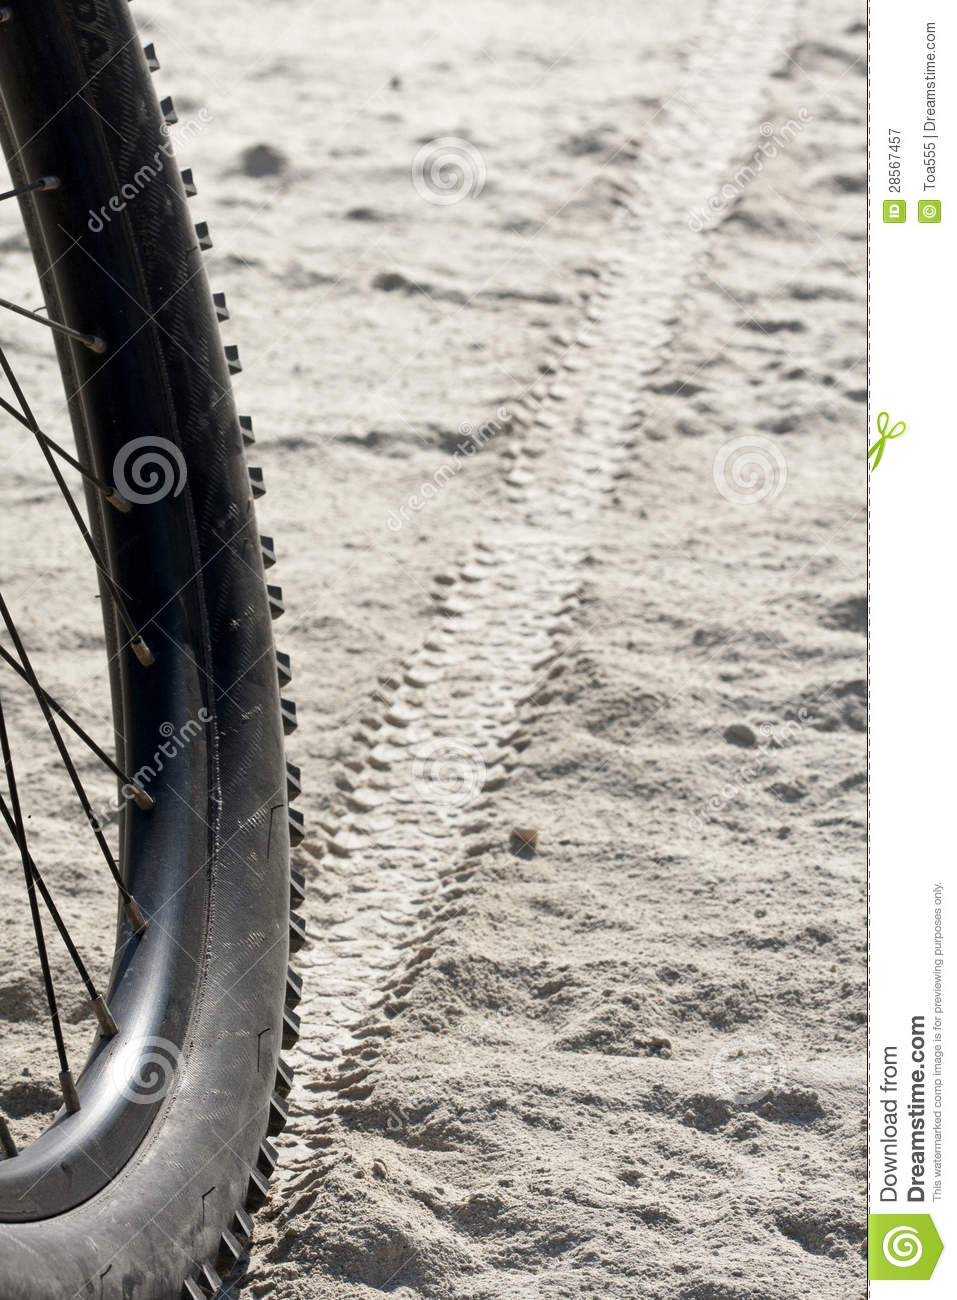 Tire Tracks On Dirt Royalty Free Stock Photography   Image  28567457